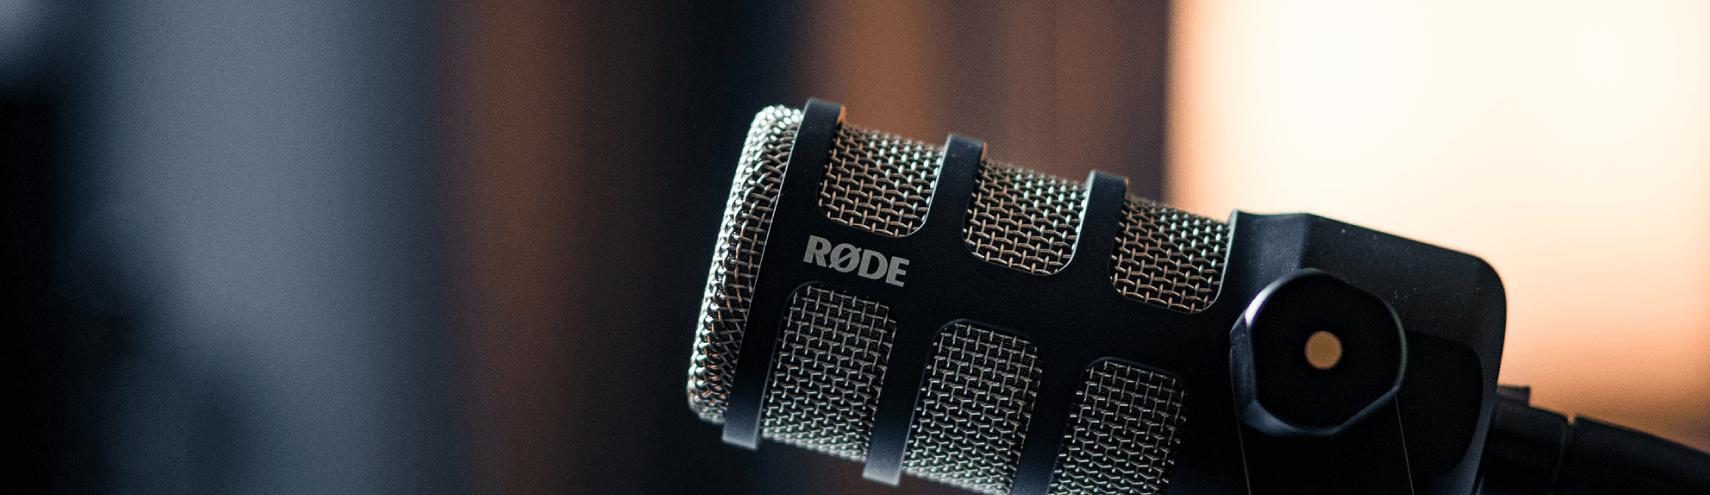 A zoomed in shot of a Rode podcast microphone